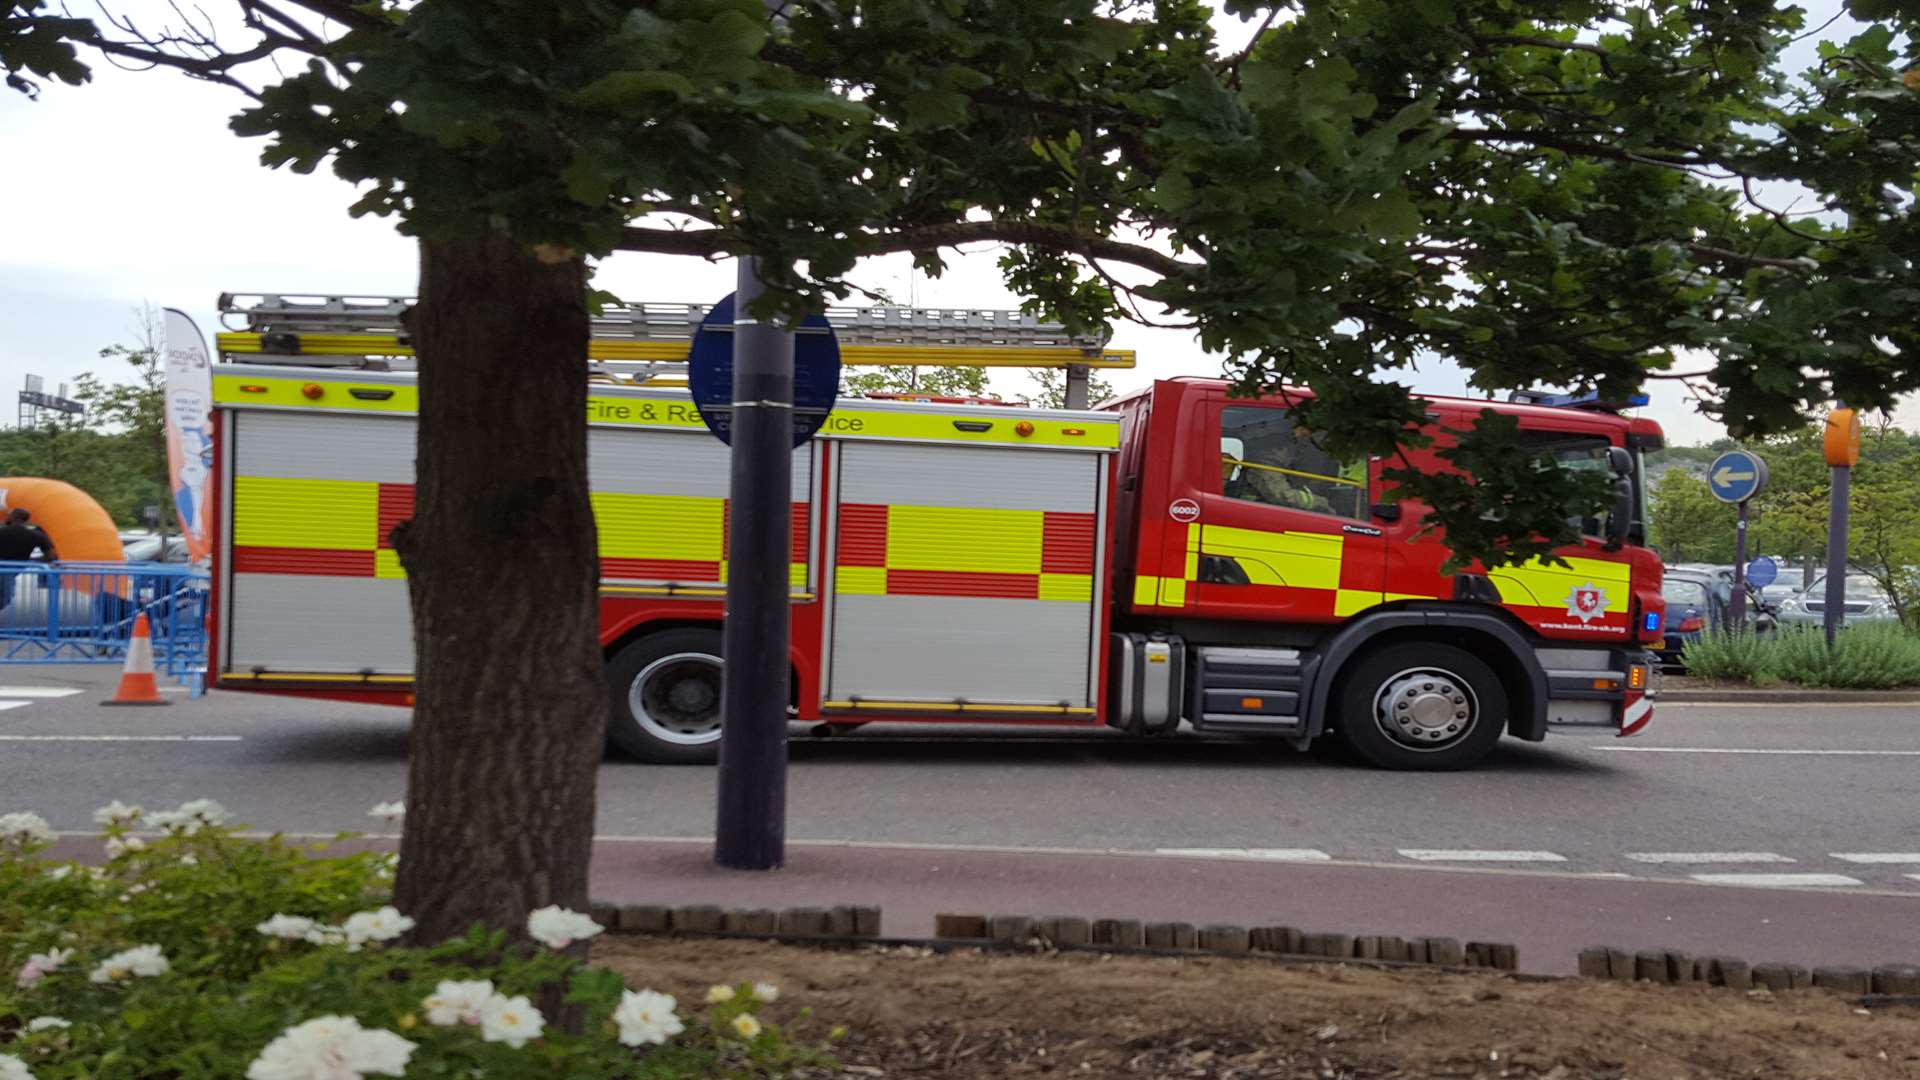 Bluewater has been evacuated after a fire started in a restaurant